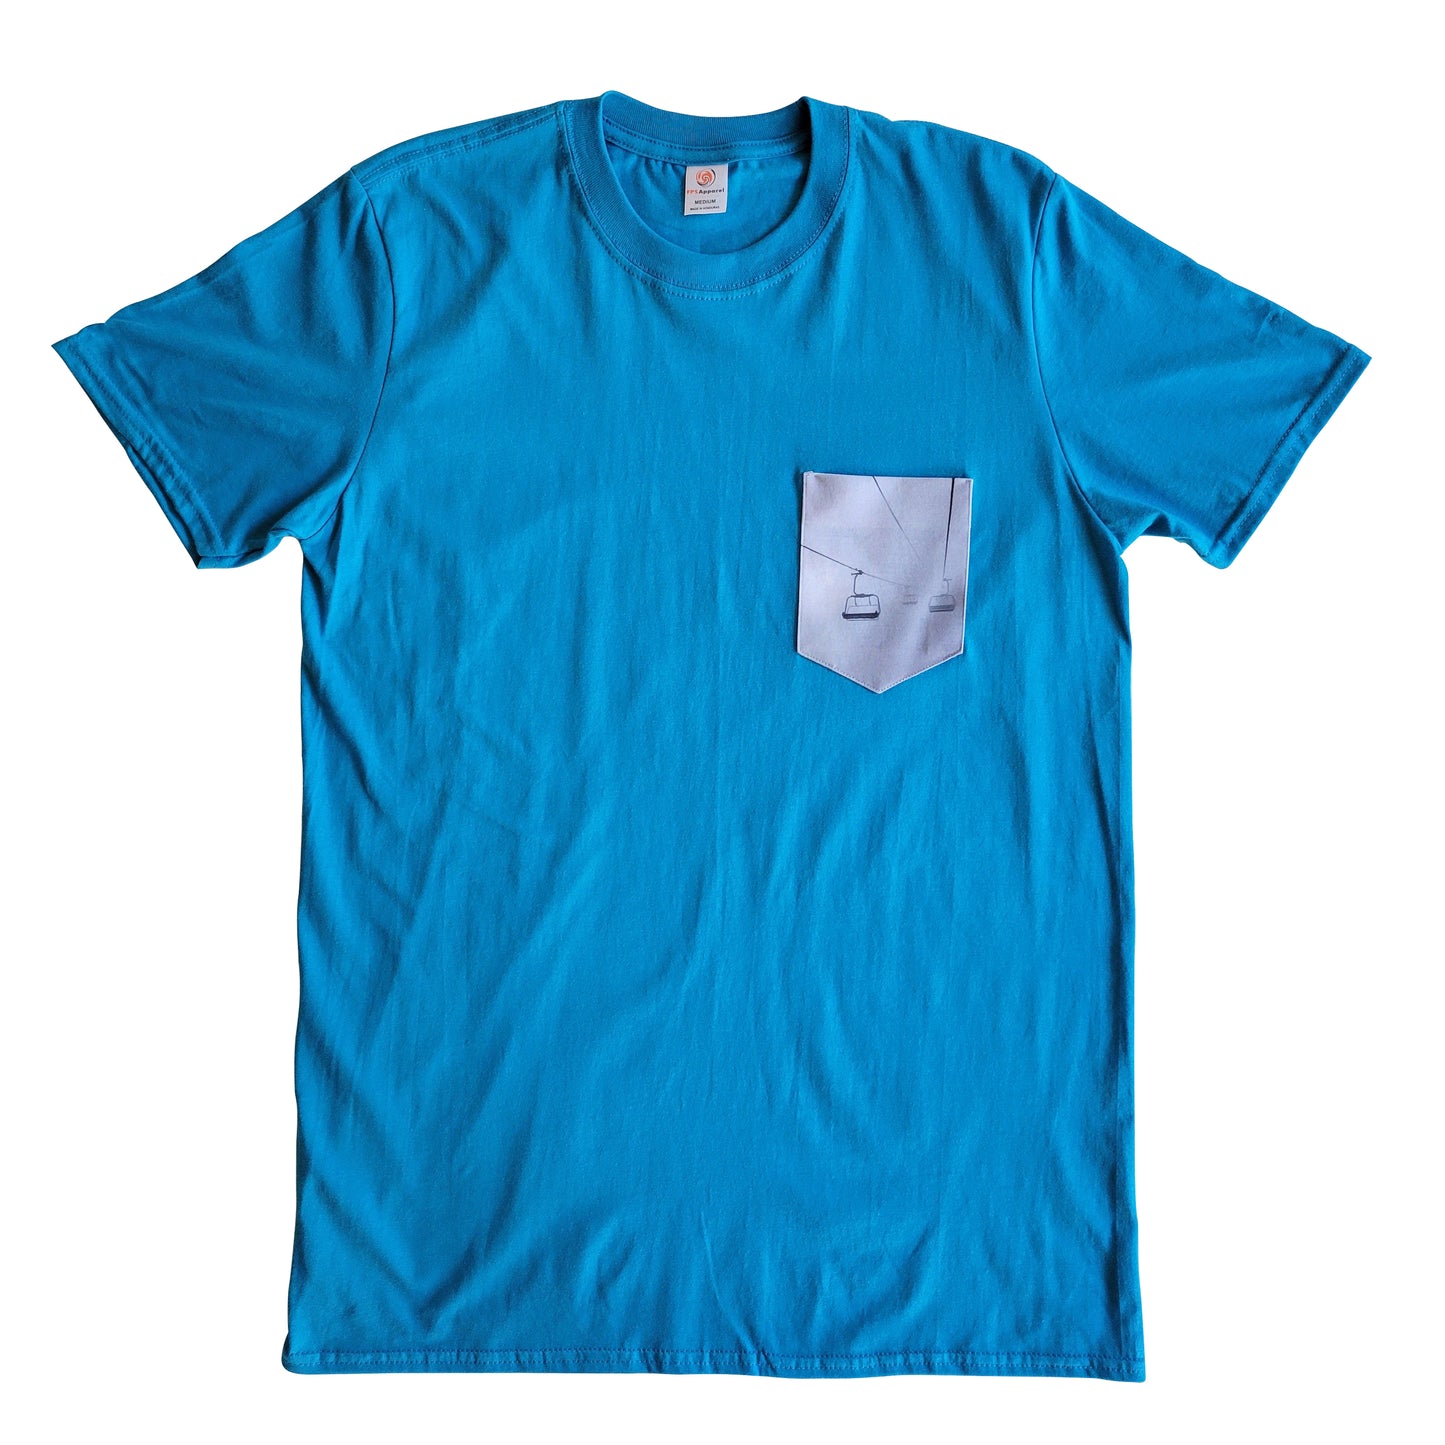 Chairlift S/S Pocket Tee Teal